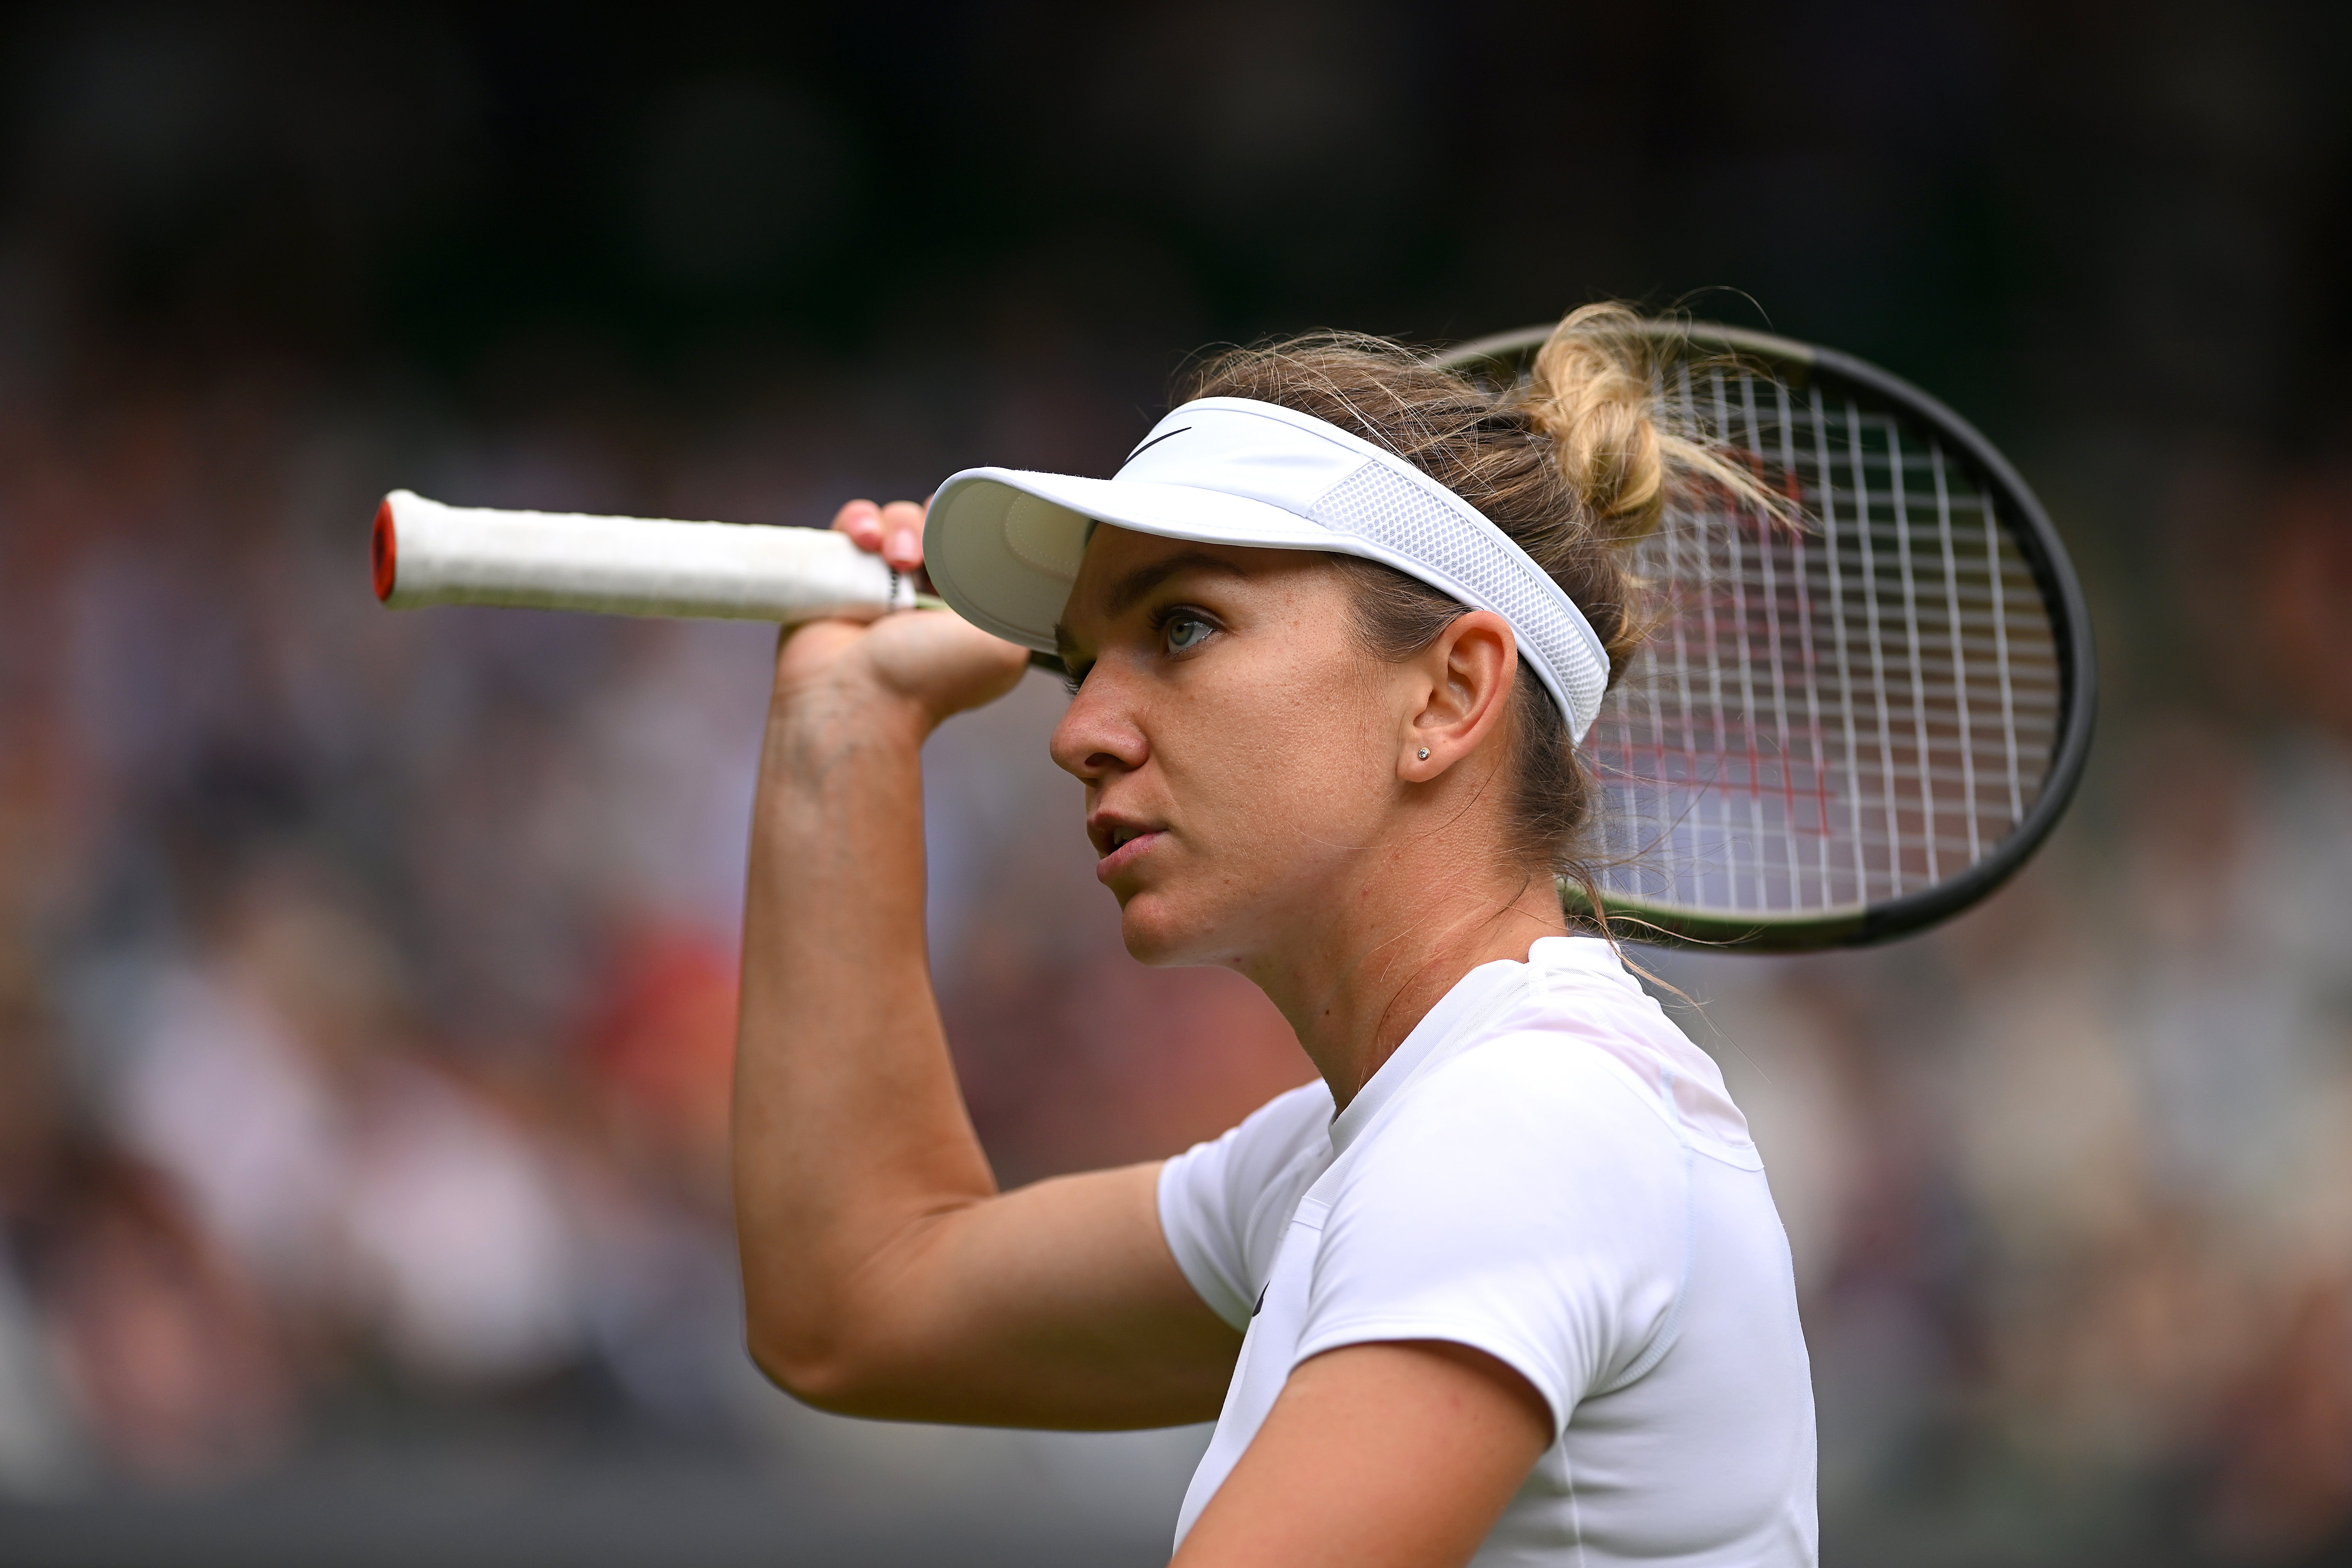 Simona Halep’s ban has been reduced to nine months